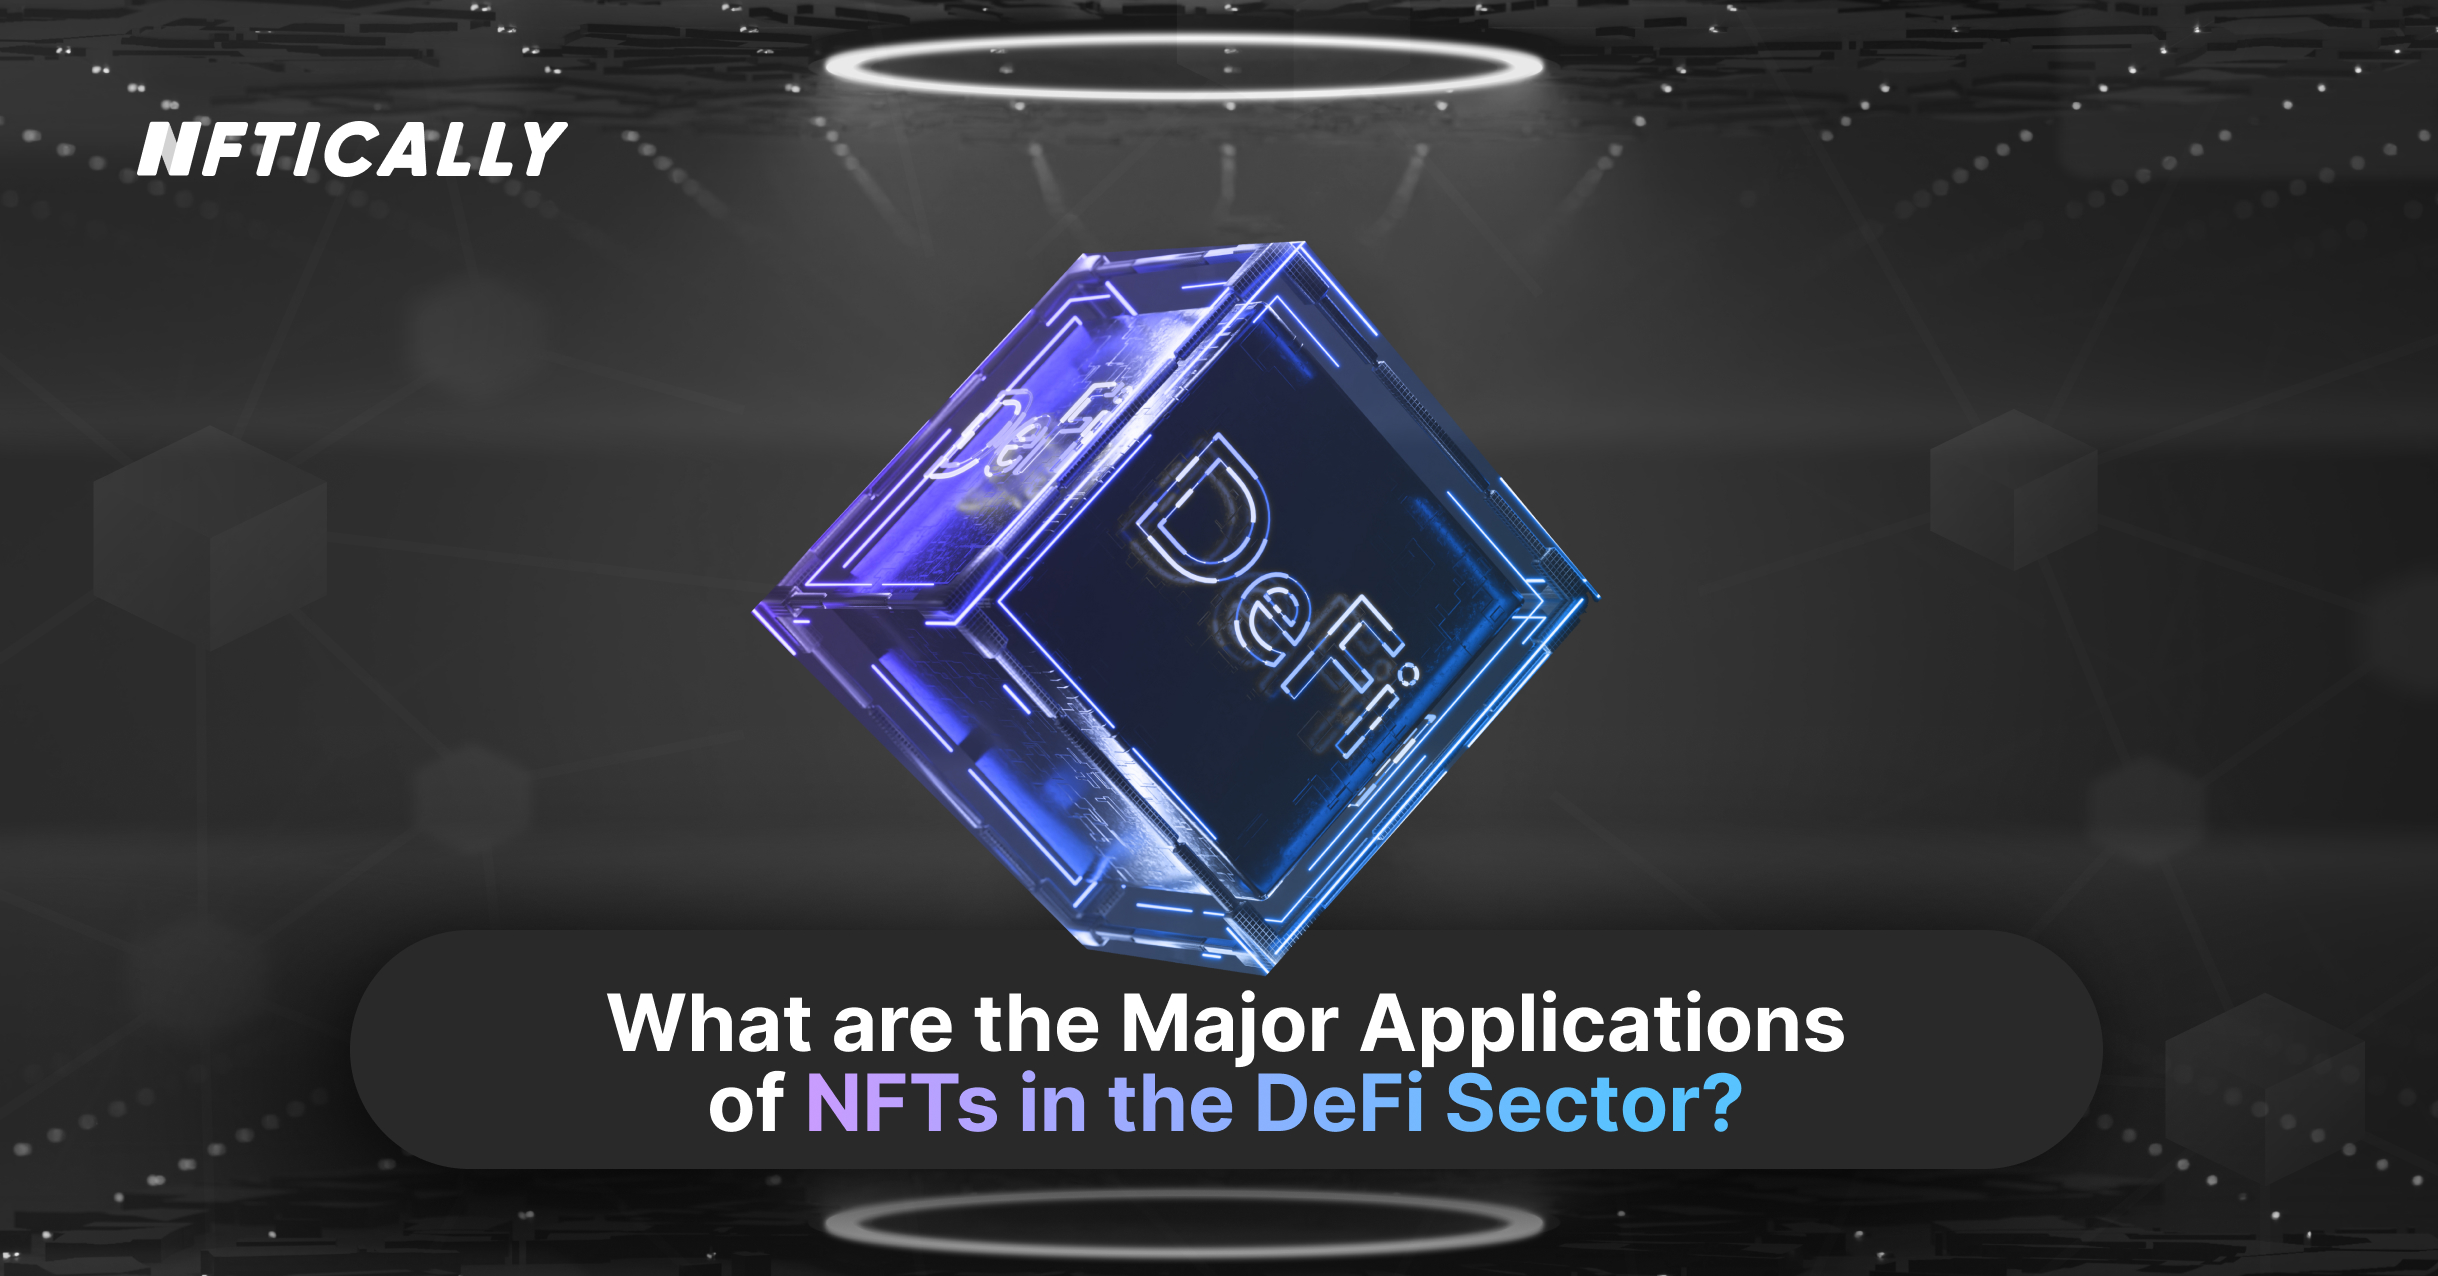 What are the Major Applications of NFTs in the DeFi Sector